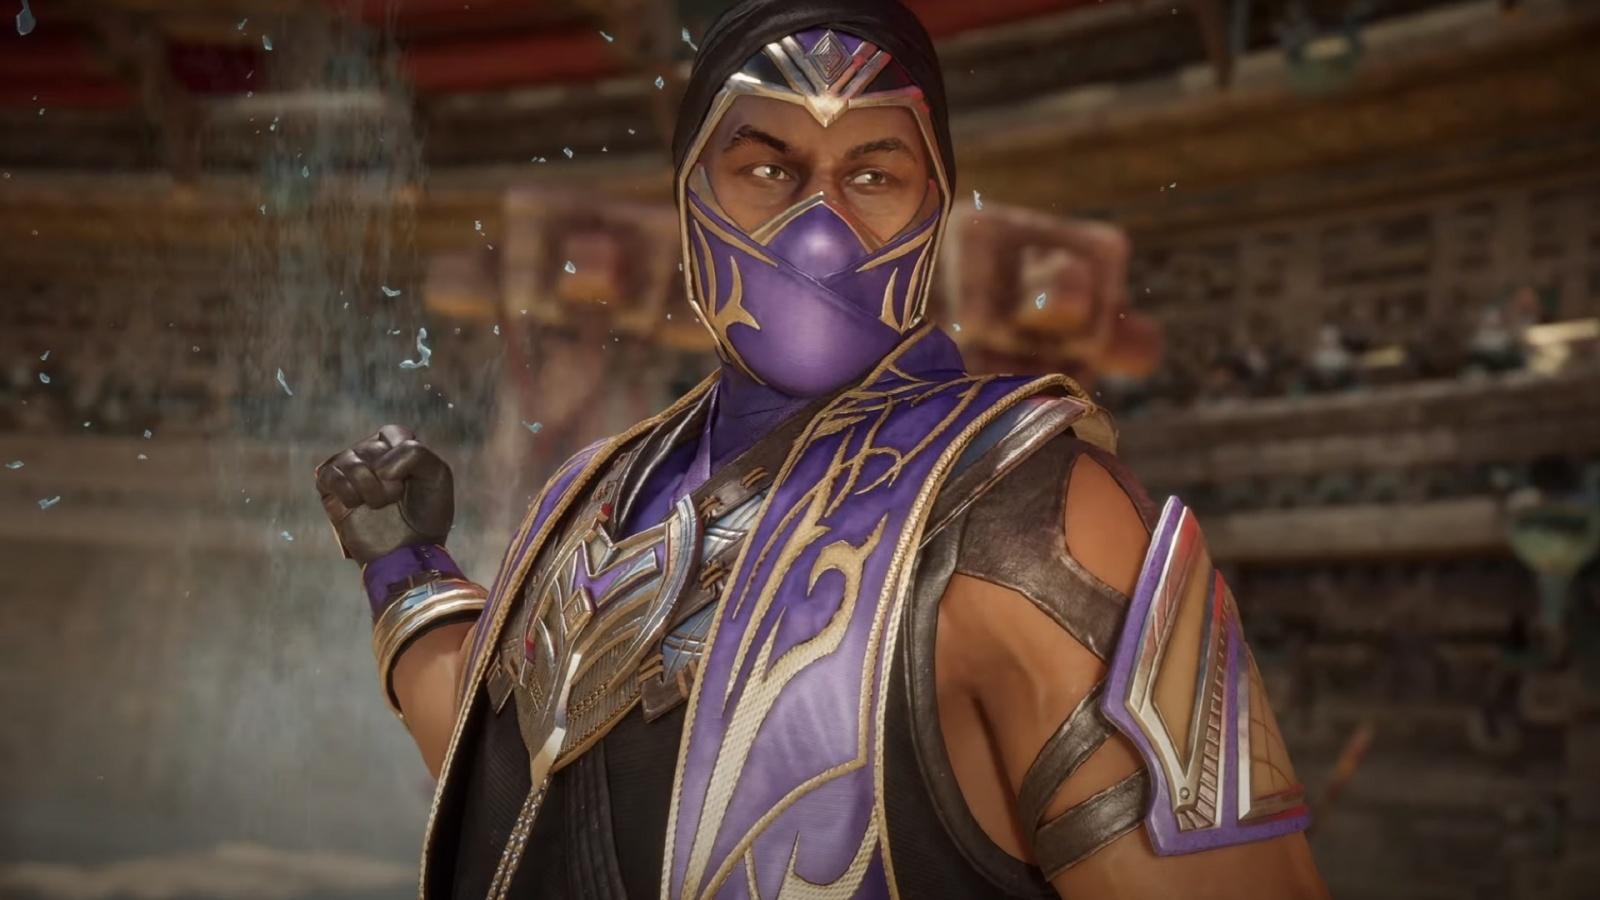 Hope they add Rain's Mortal Kombat X story mode skin. It's the only one we  never got to play with. I'm a Rain's been my main since Mortal Kombat  Trilogy. : r/MortalKombat